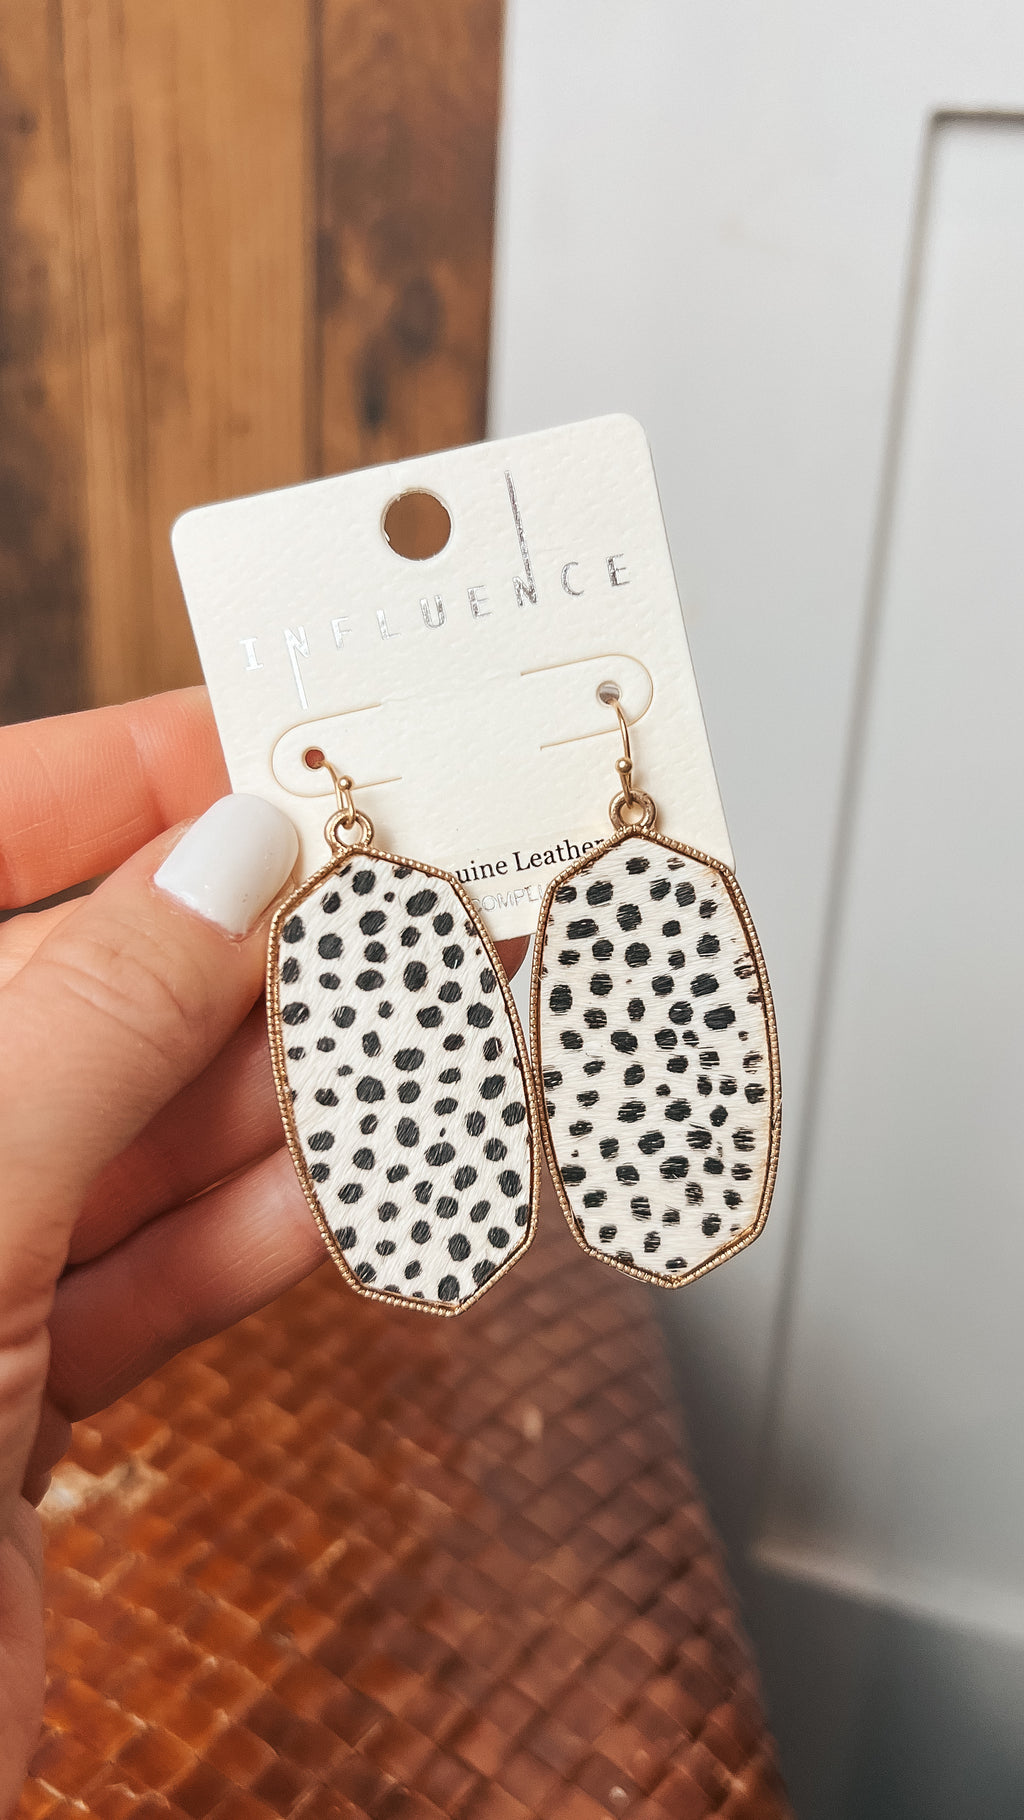 Veronica Spotted Earrings: White